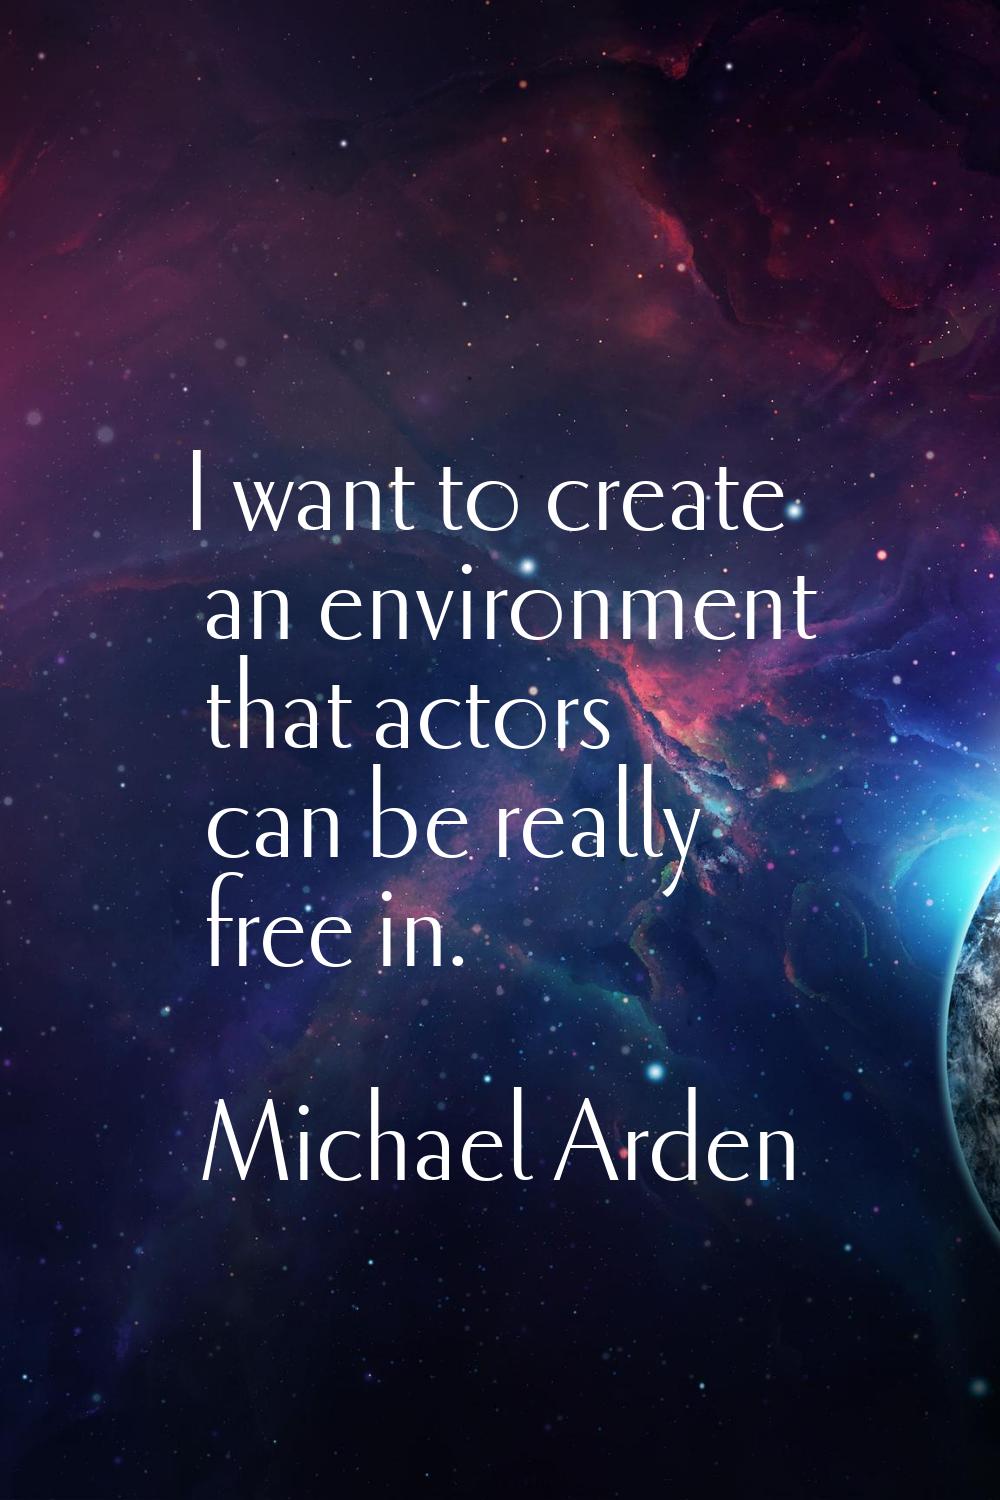 I want to create an environment that actors can be really free in.